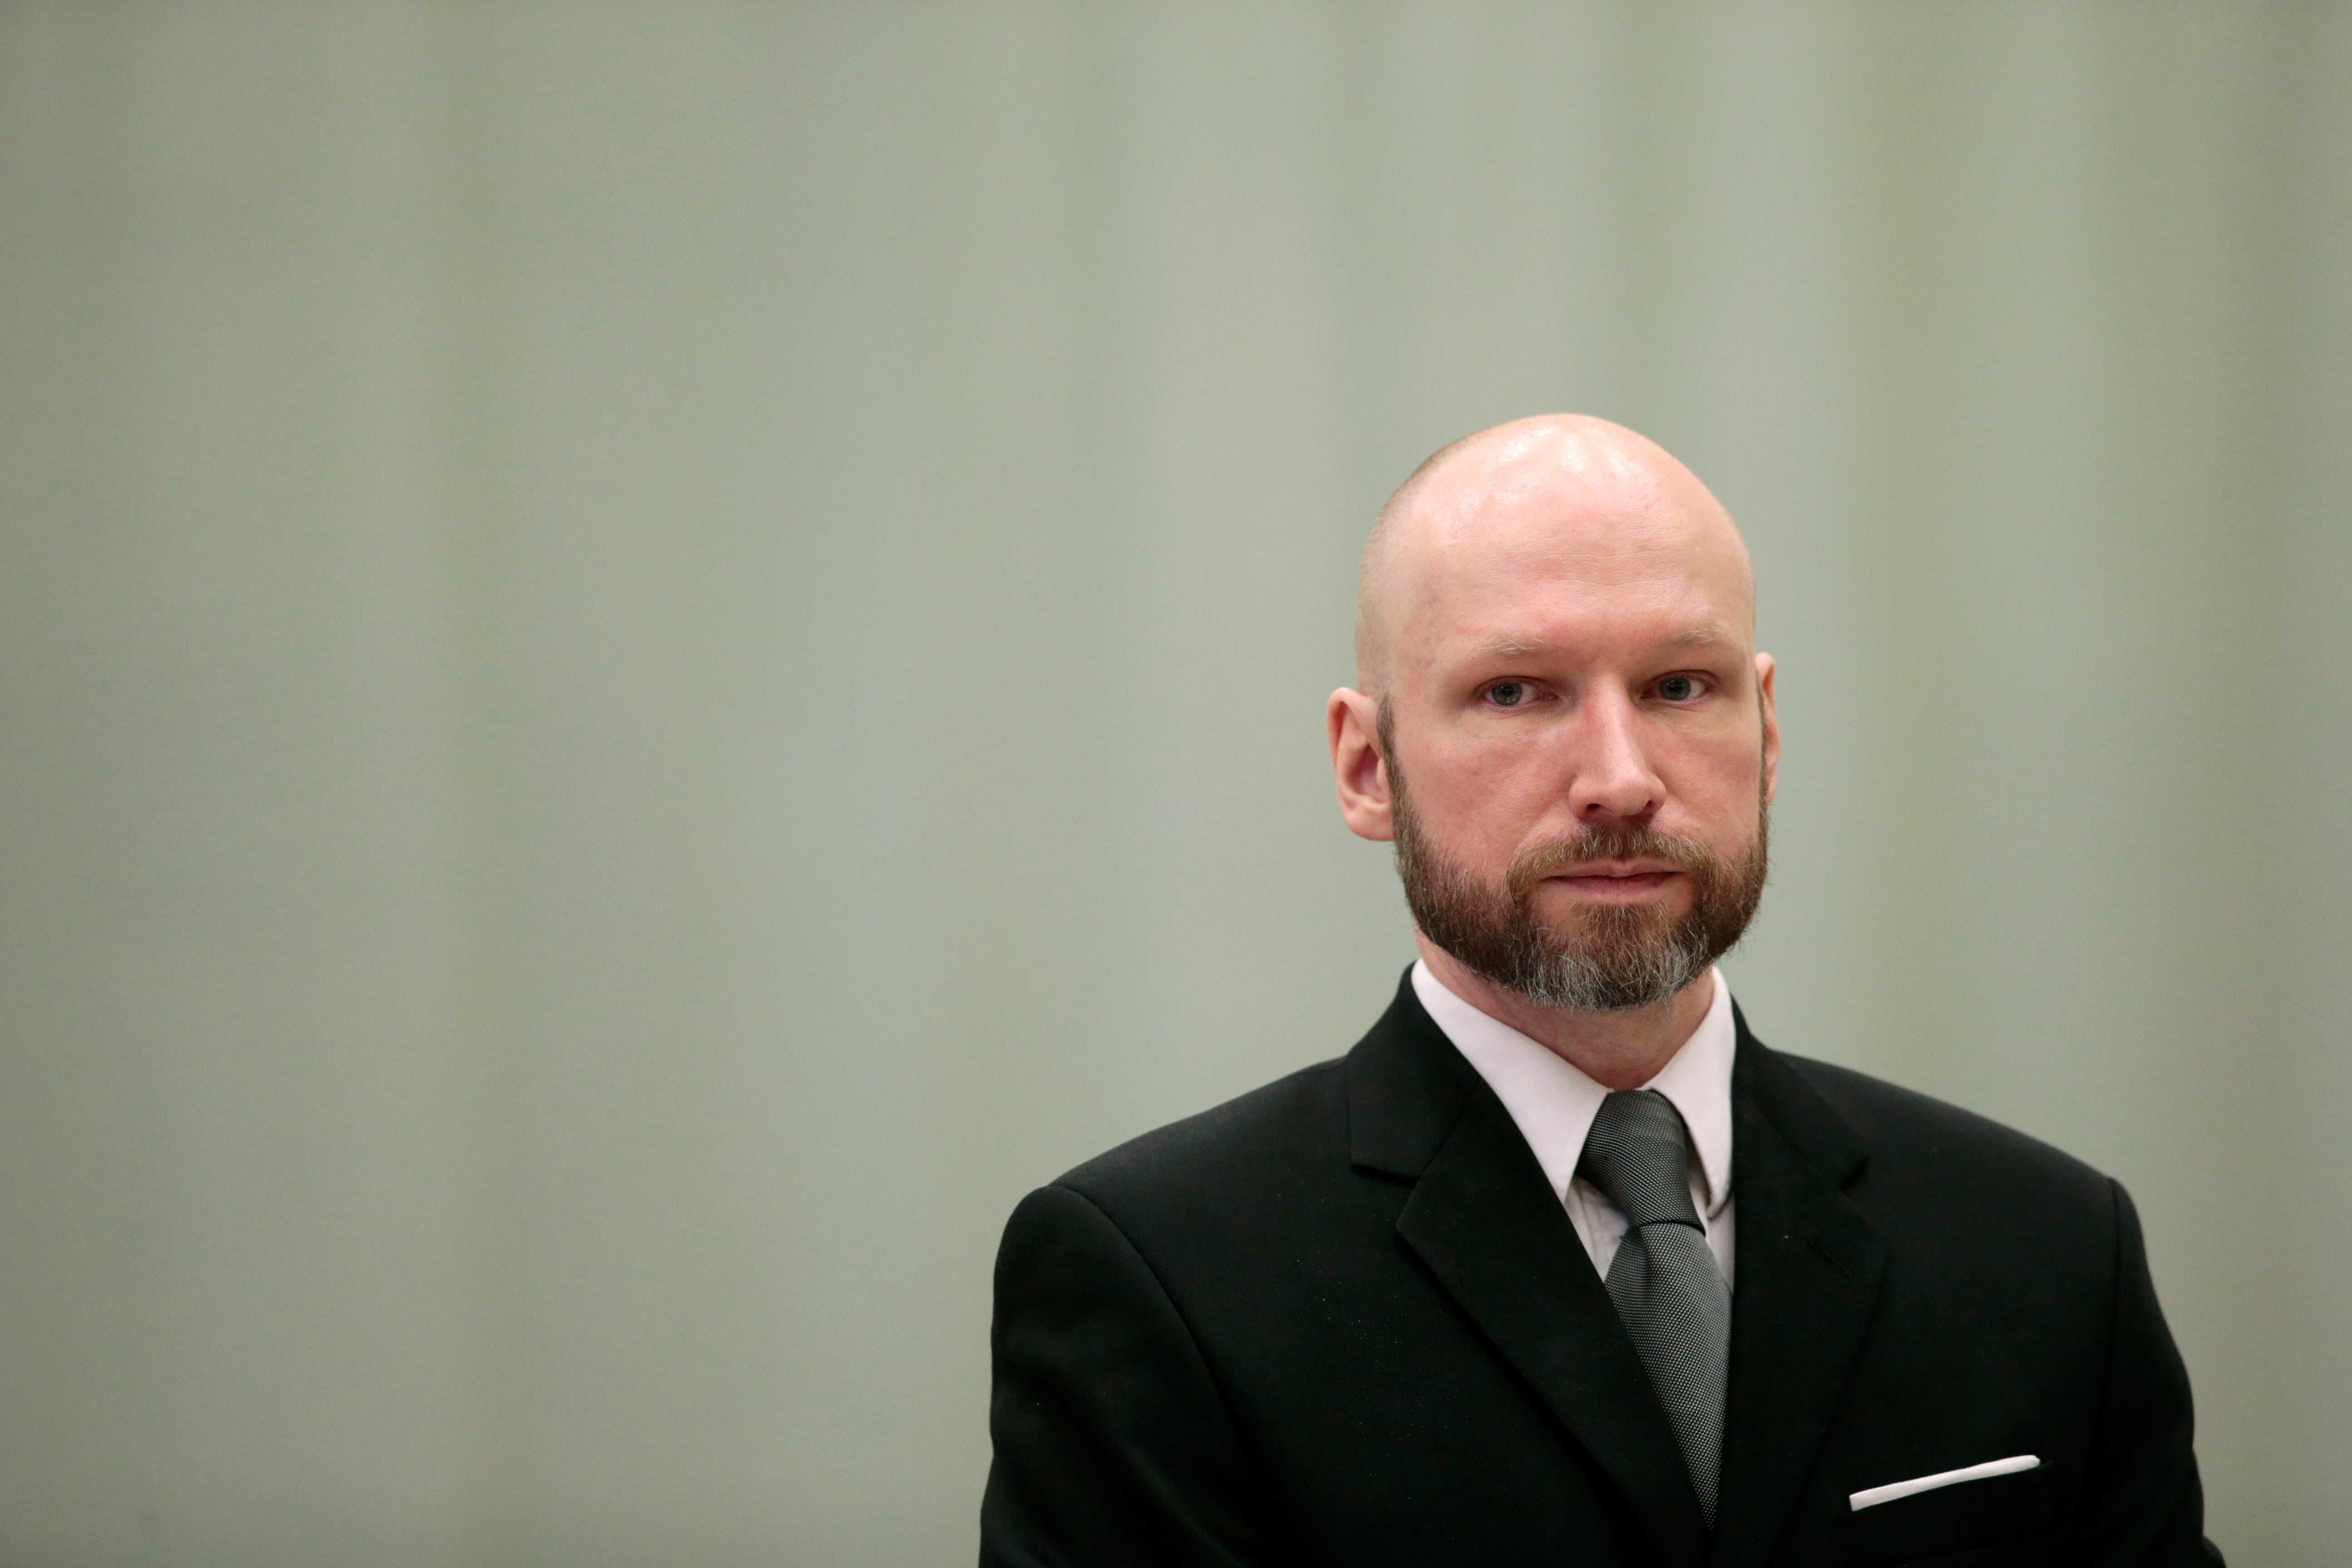 Convicted mass murderer Anders Behring Breivik looks on during the last day of his appeal case